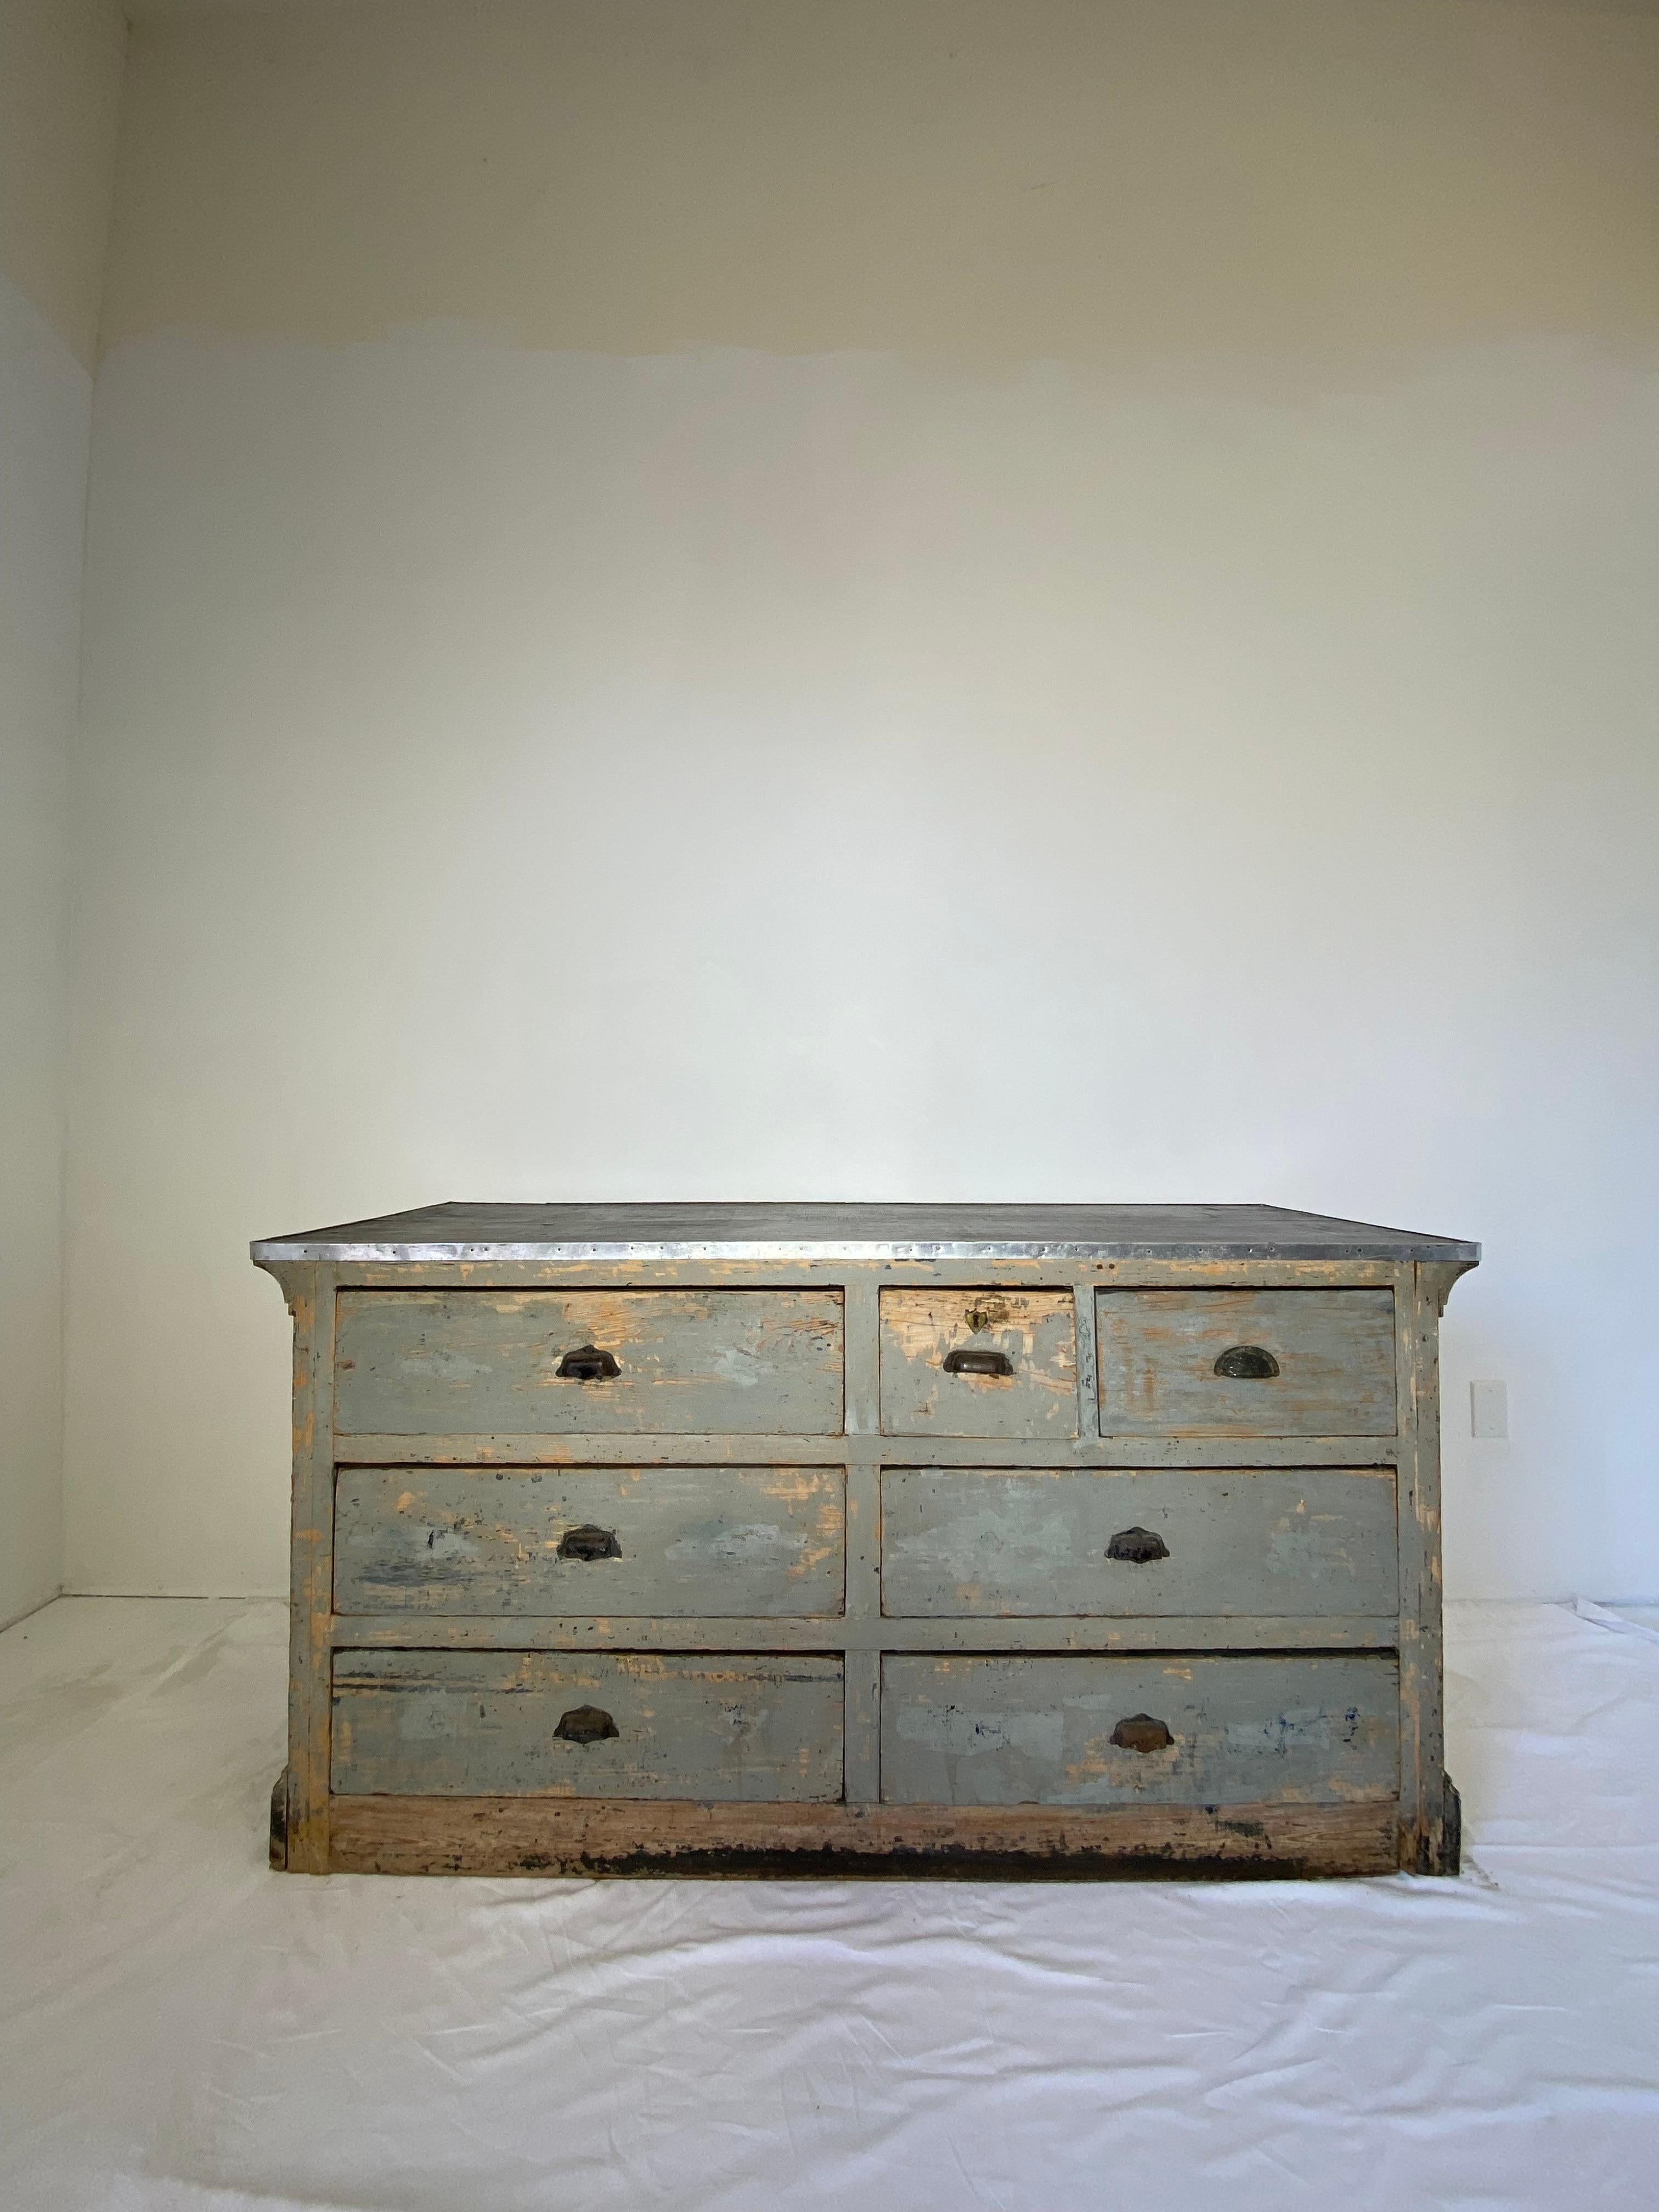 Early 19th century light blue painted store counter with 7 drawers, one drawer with shield emblem key plate iron pull handles (probably added later). Metal border to top of counter new.